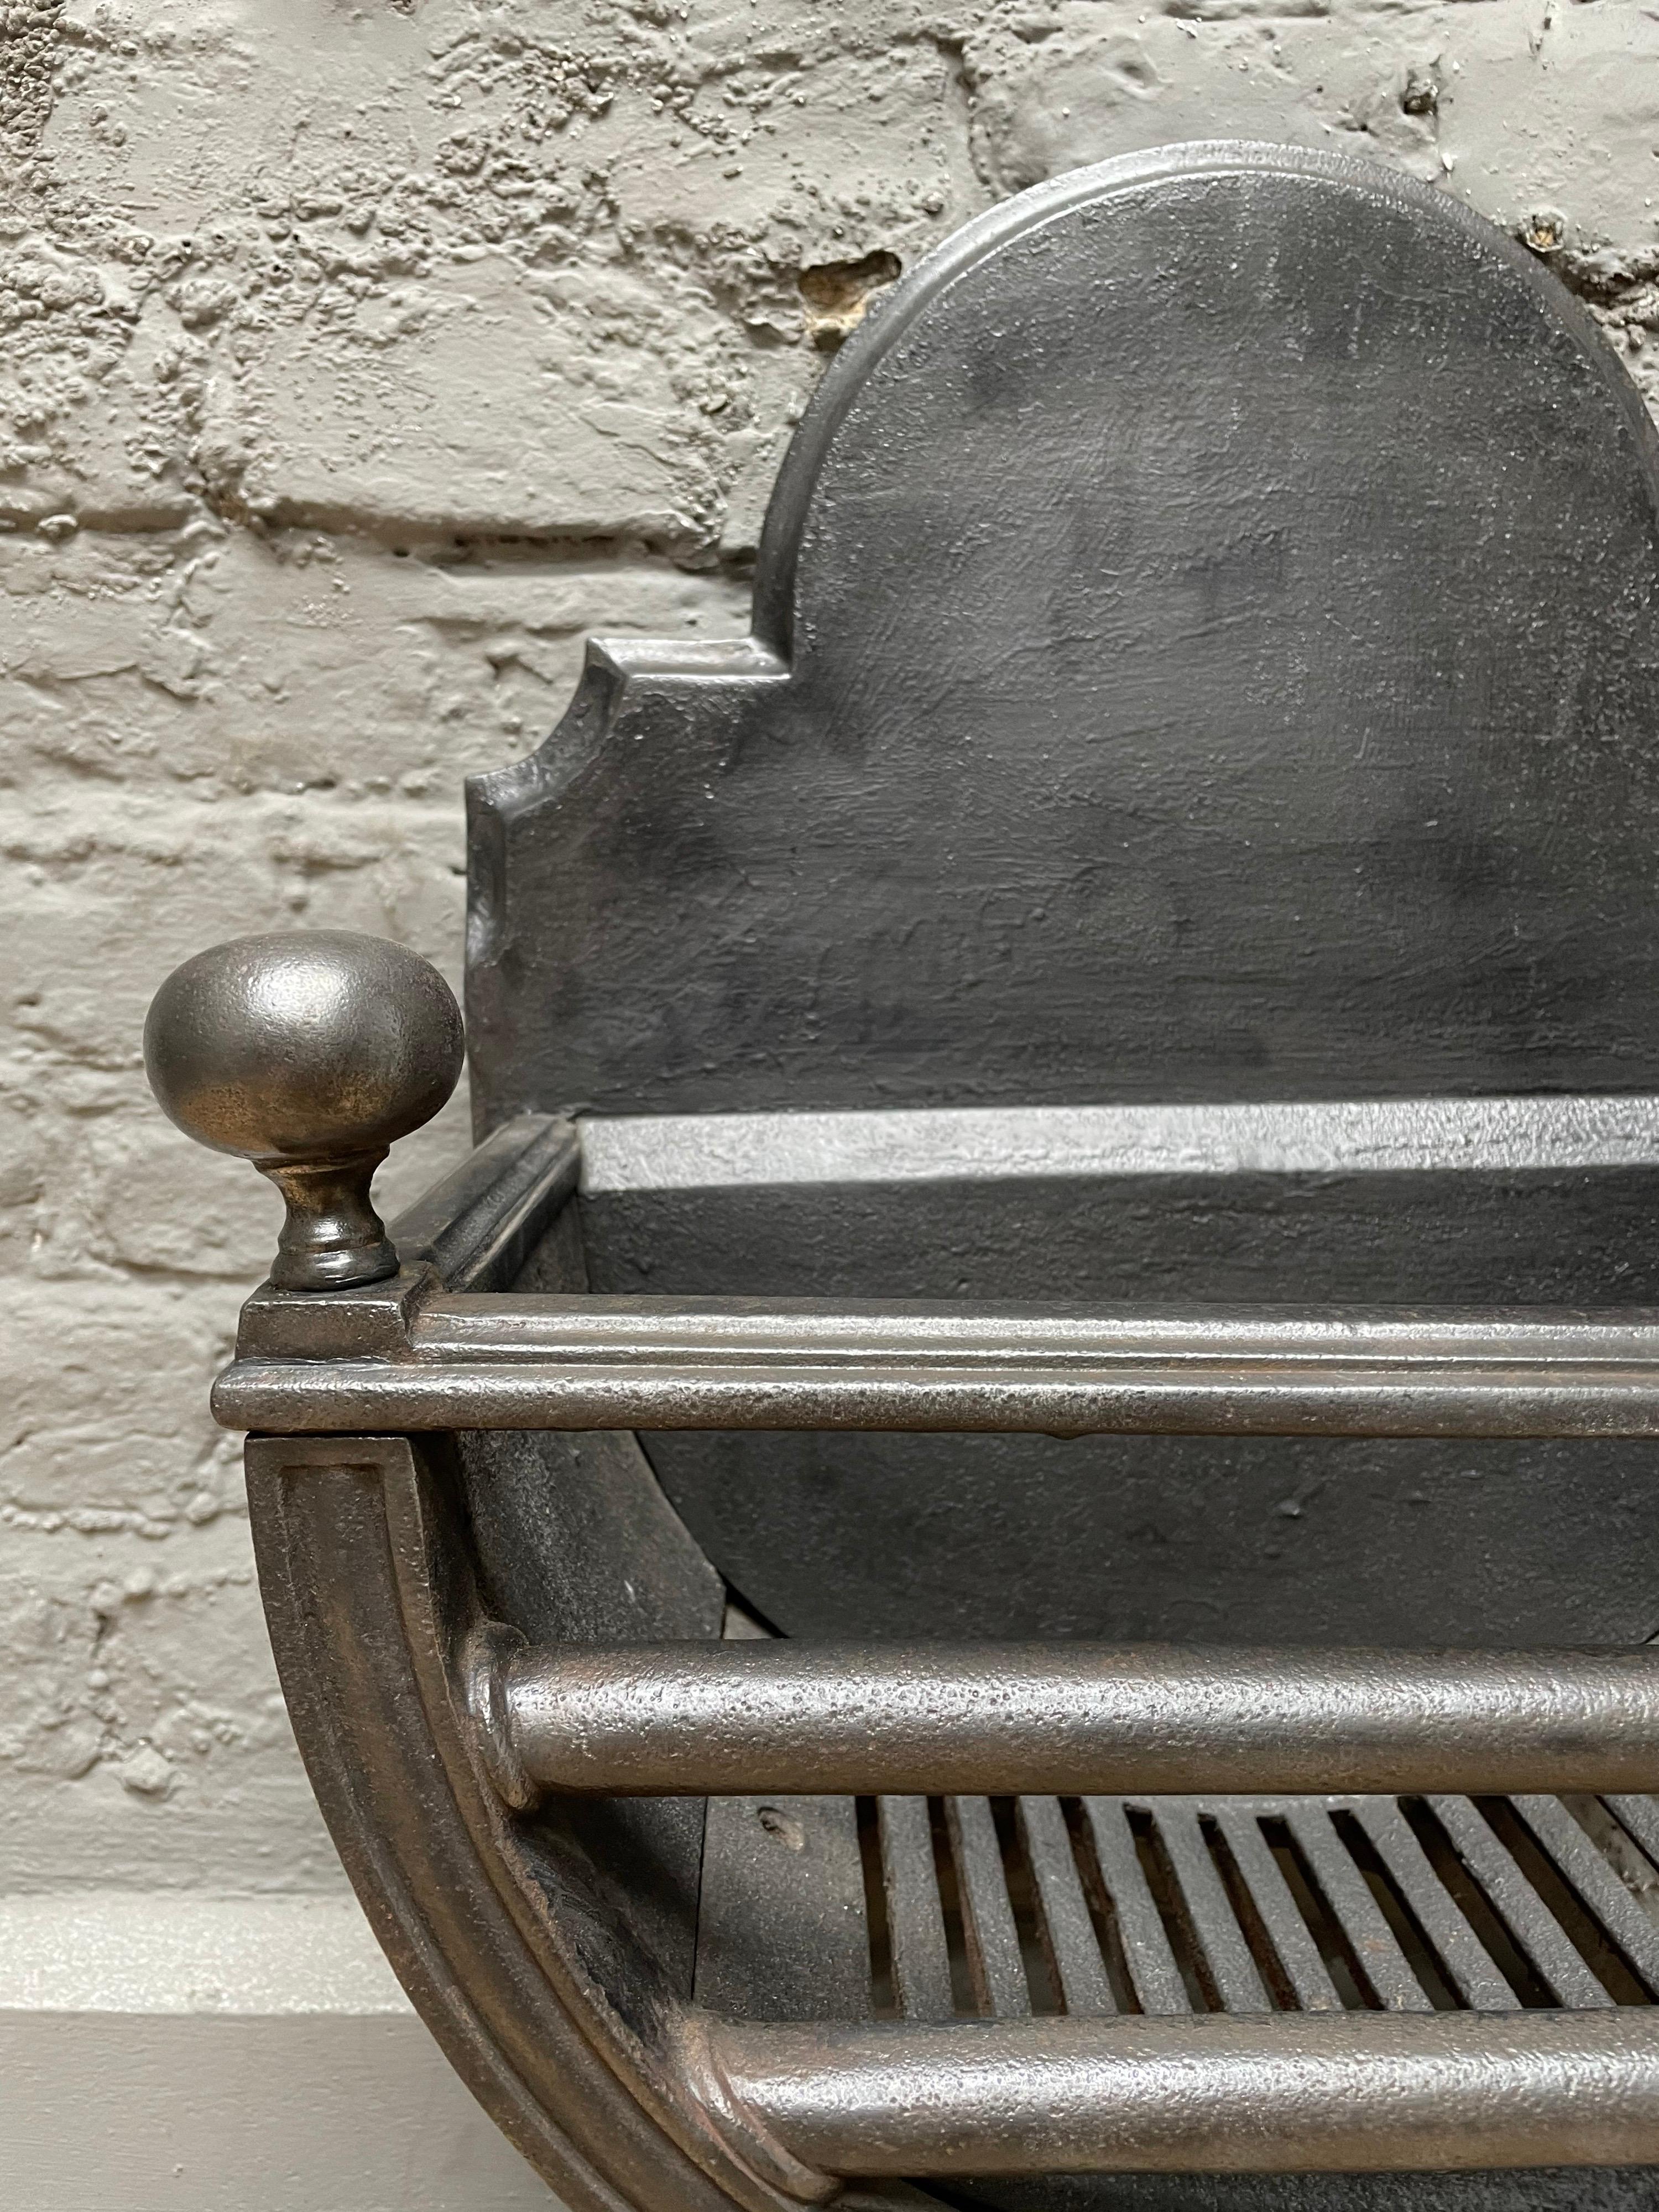 A regency style fire grate in polished cast iron, the X-frame with straights bars, shaped fire back and ball finials. A good quality grate from the 19th century.